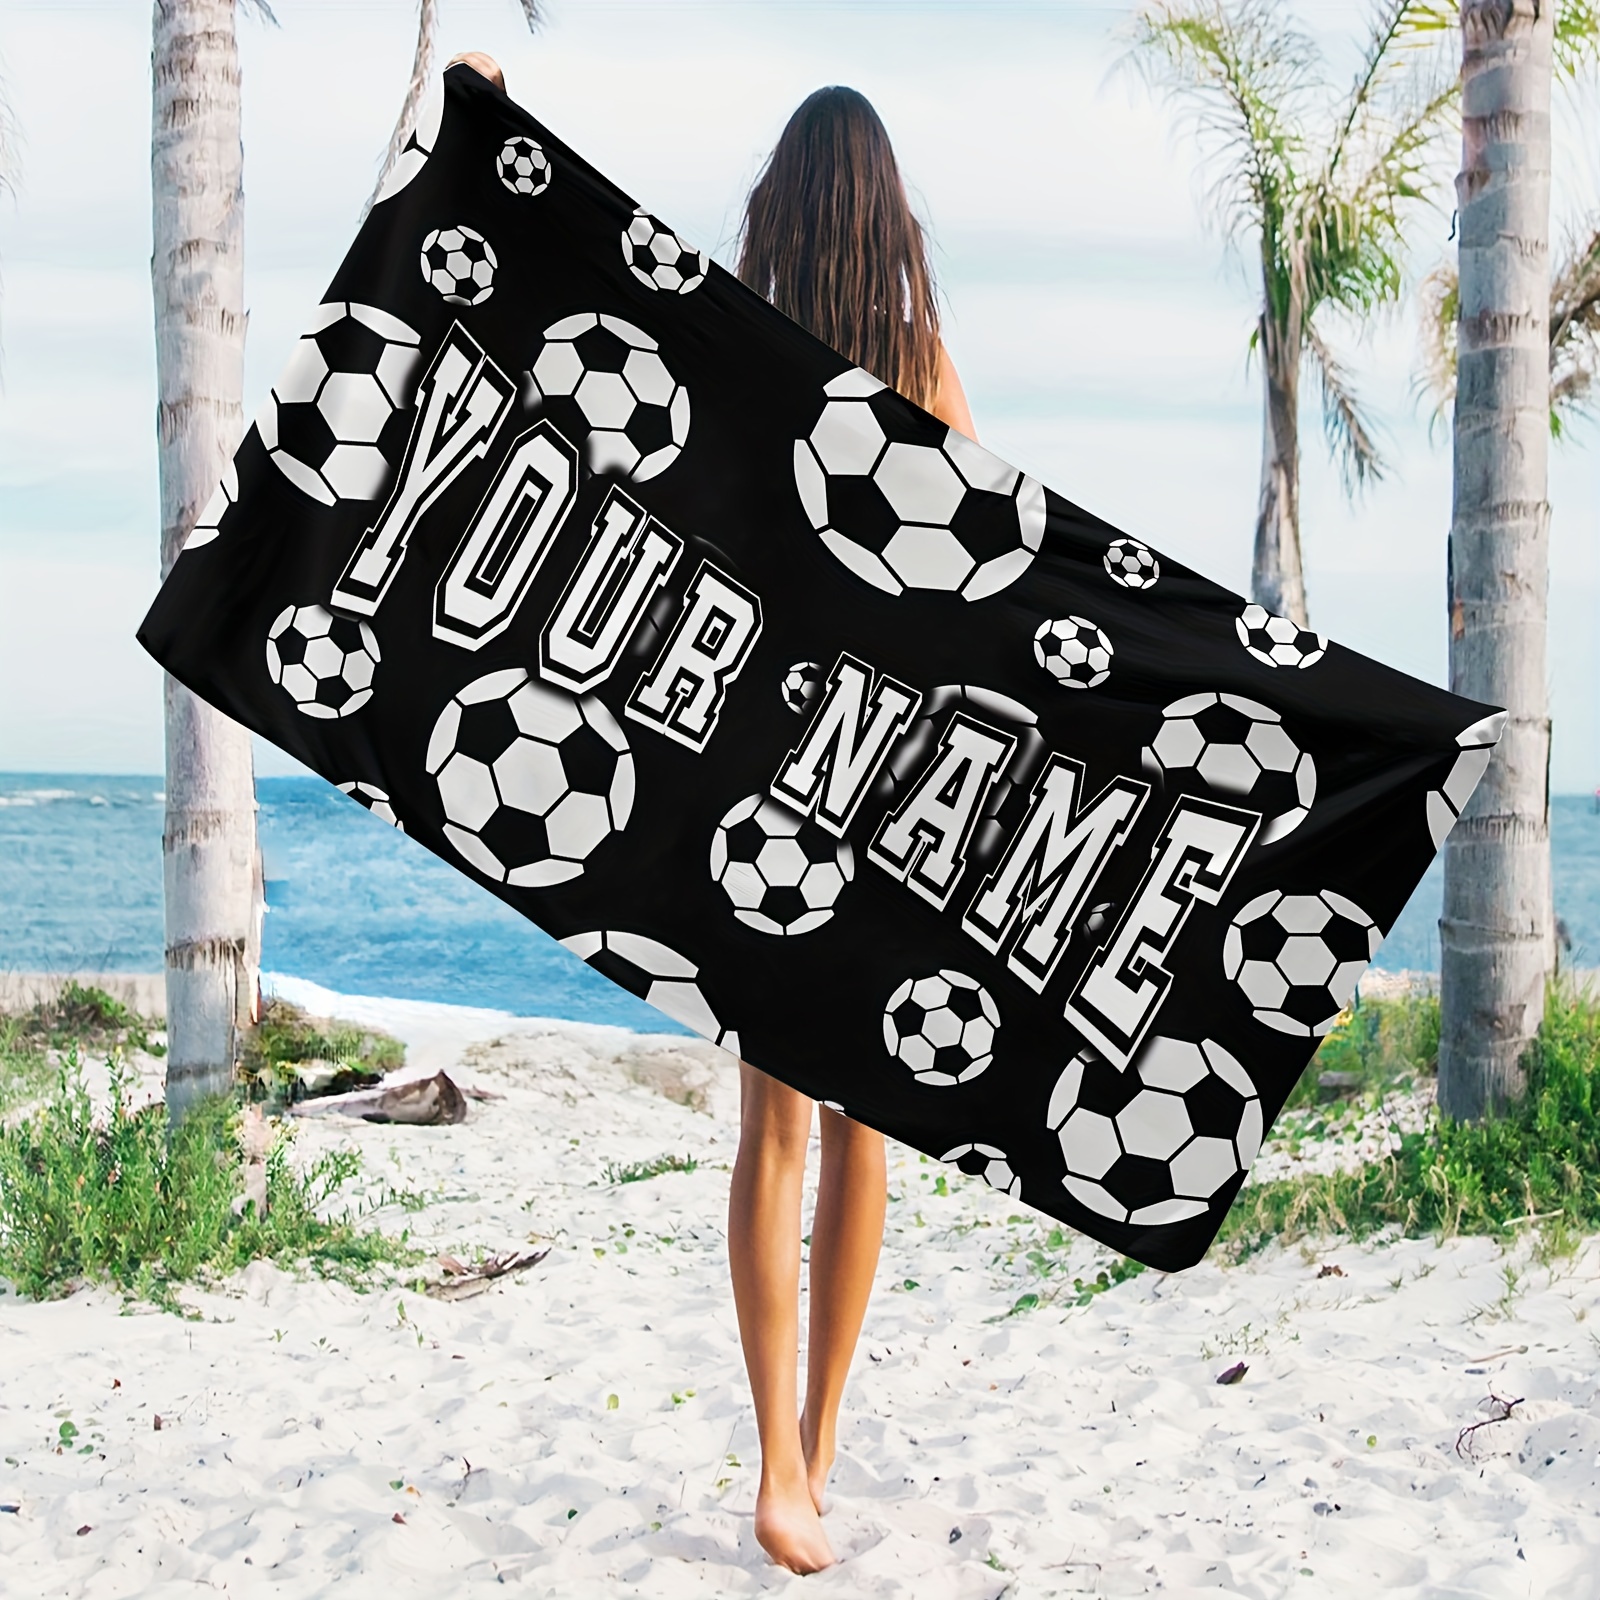 

1pc Name Customized Beach Towel, Football Personalized Beach Blanket, Super Absorbent & Quick-drying Swimming Towel, Suitable For Beach Swimming Outdoor Camping Travel, Ideal Beach Essentials